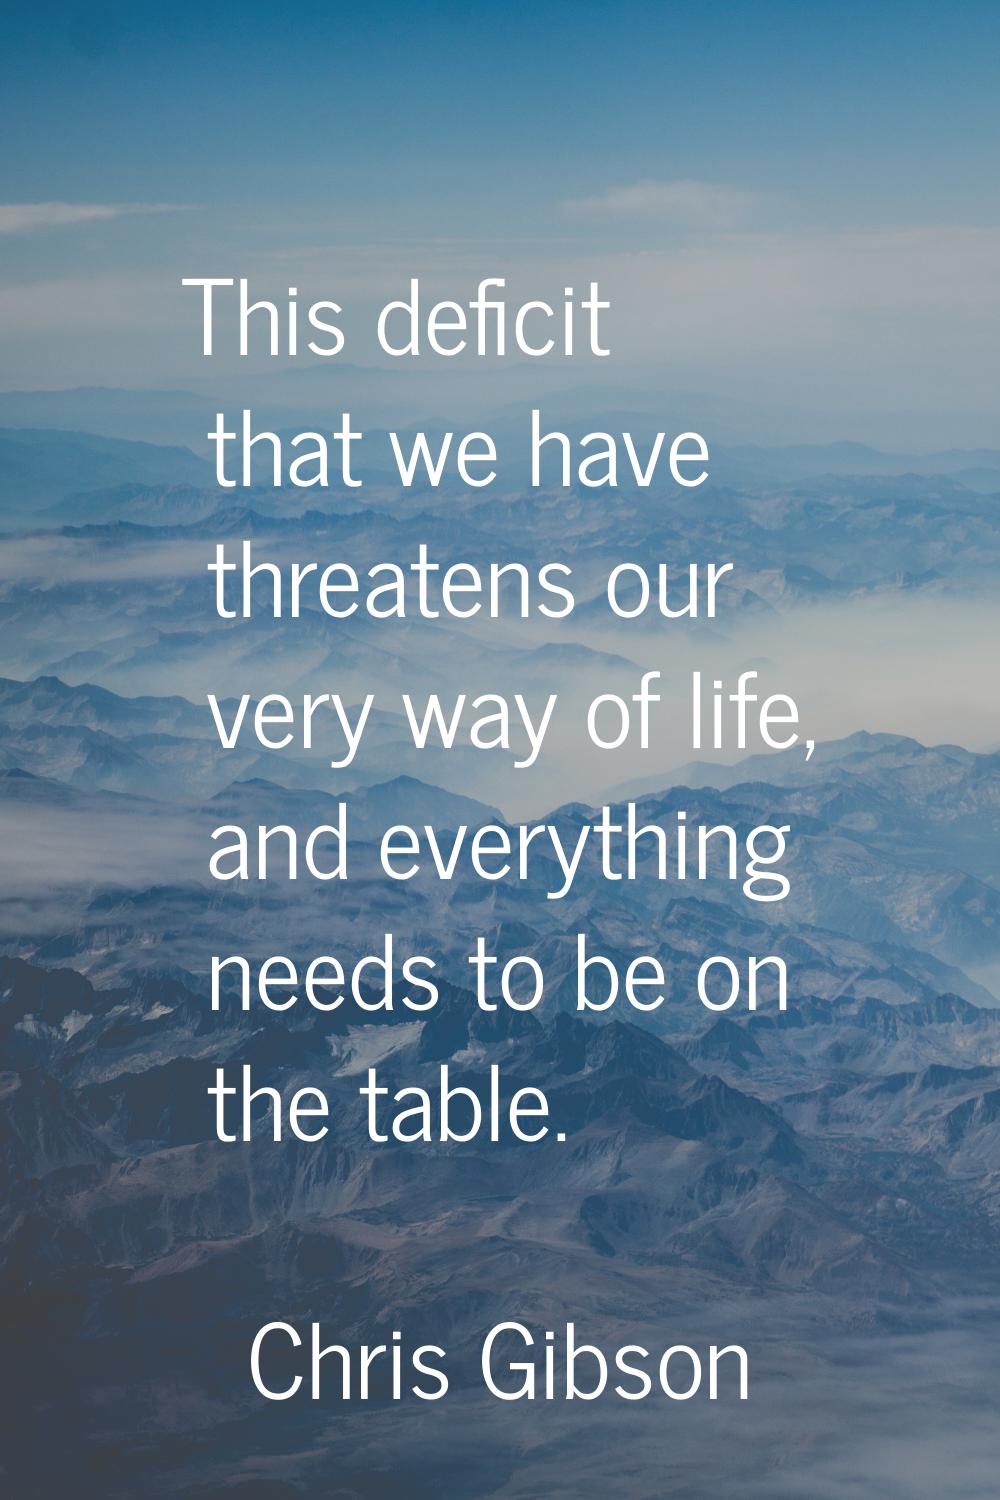 This deficit that we have threatens our very way of life, and everything needs to be on the table.